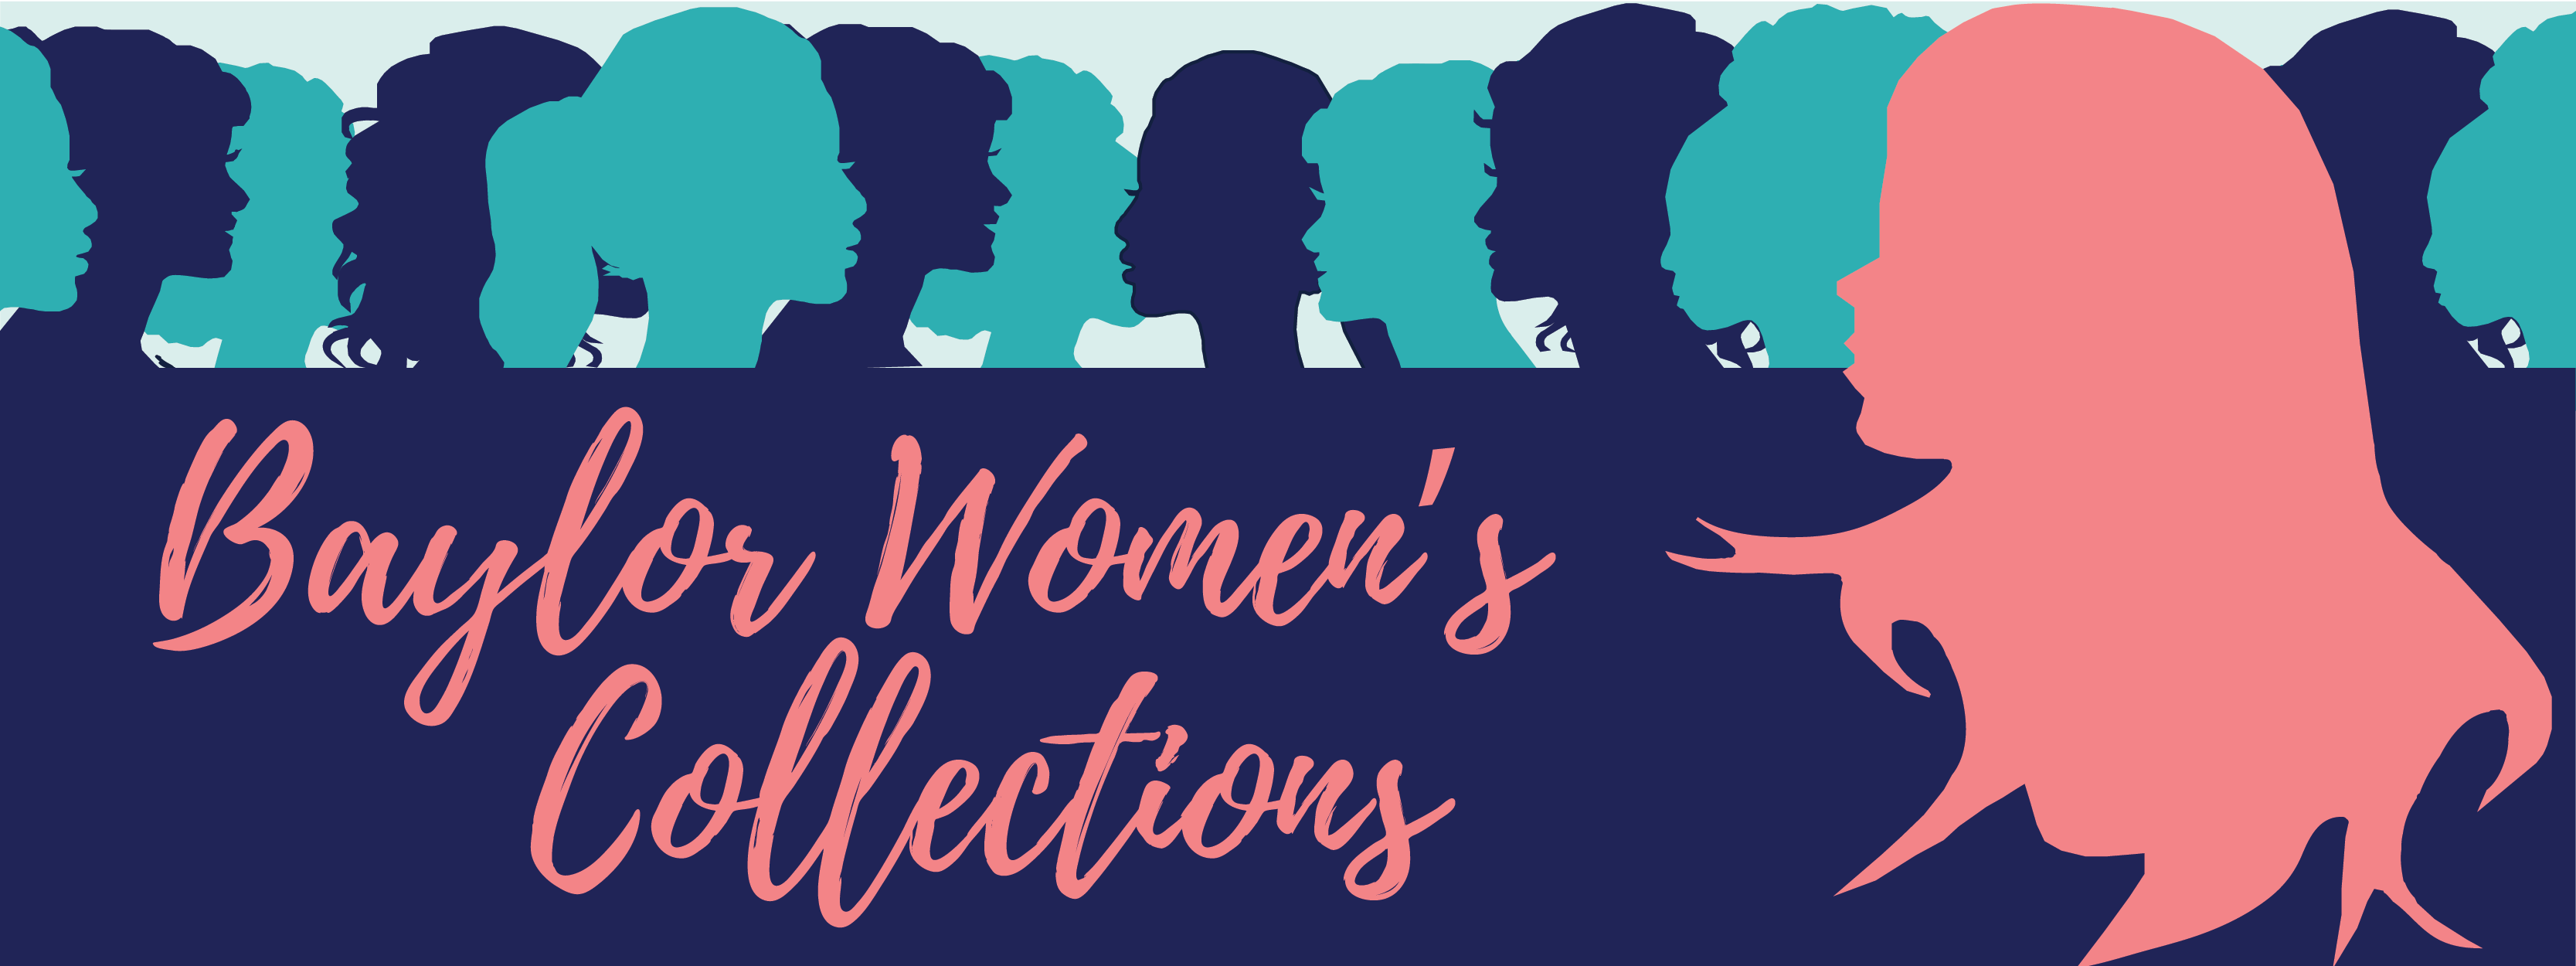 Baylor Women's Collections Banner Graphic with woman's silhouette at right, with hair flowing toward left